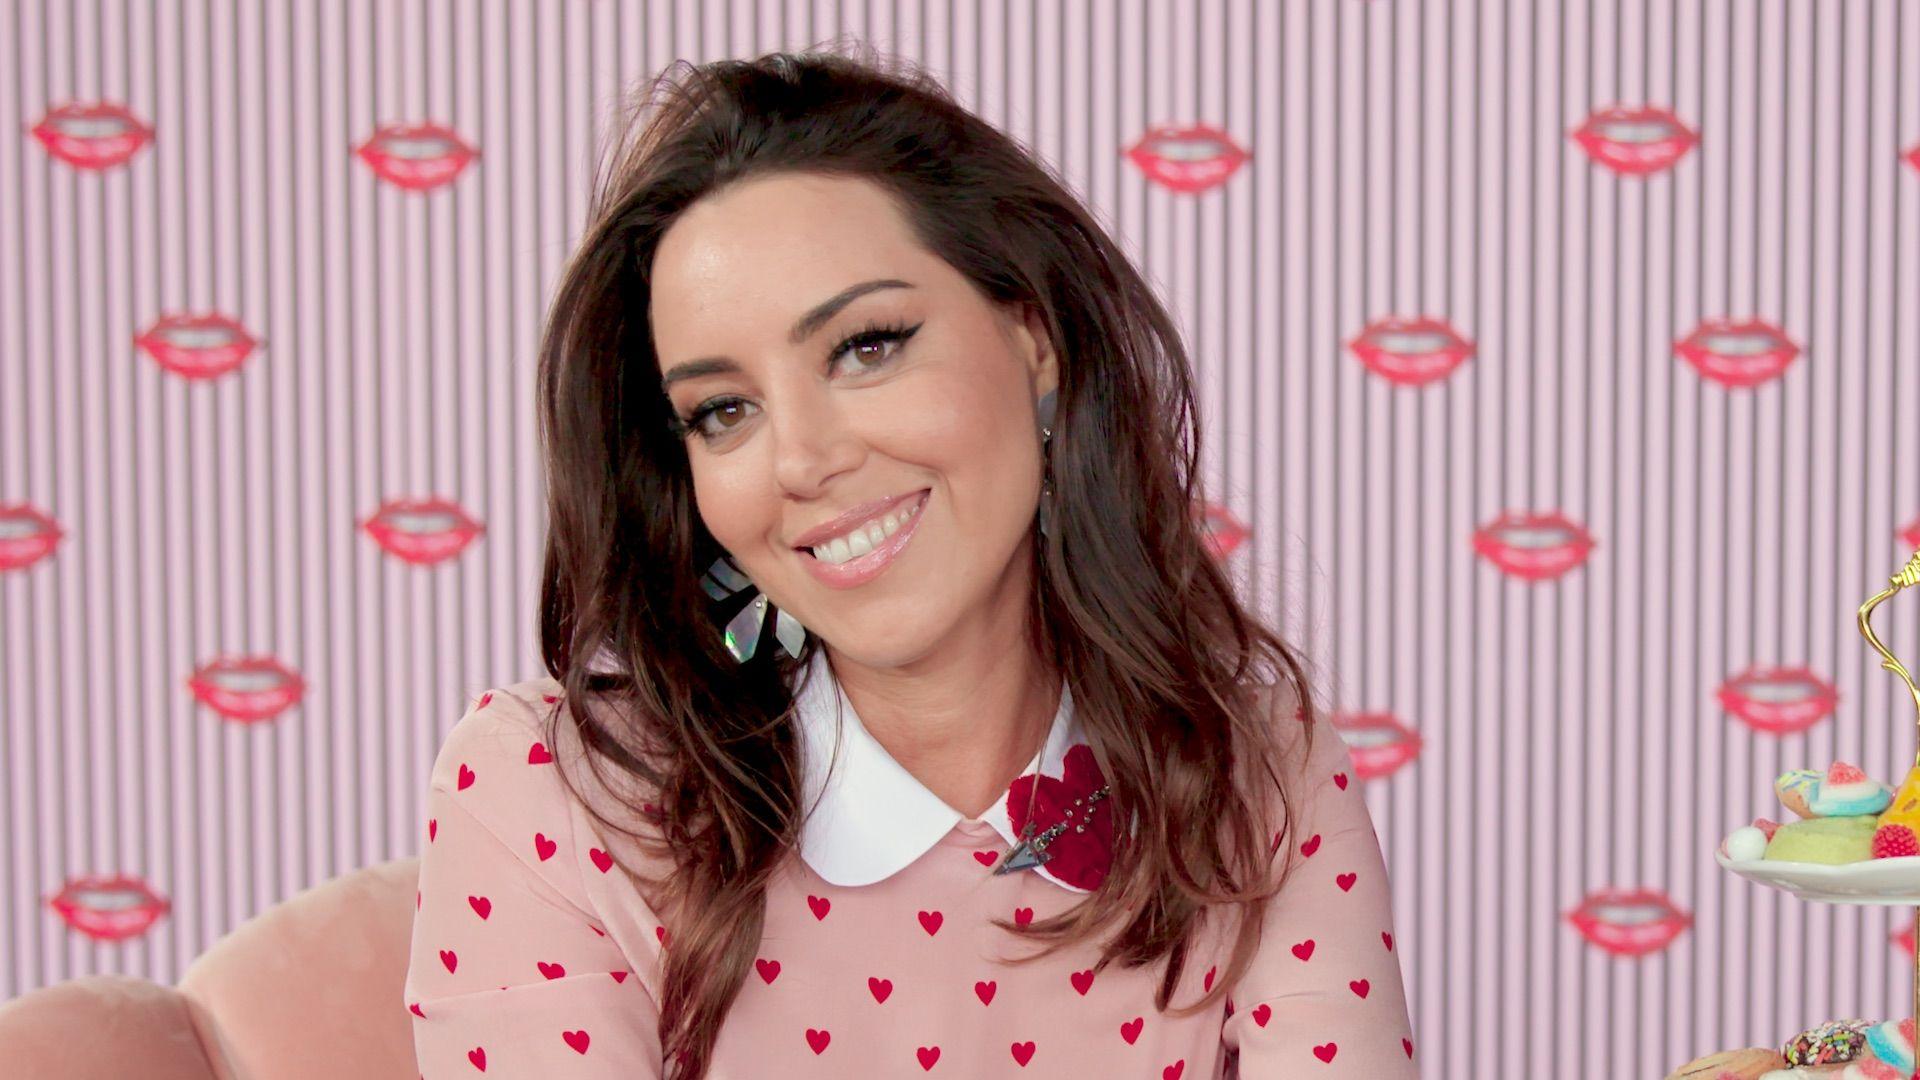 Watch Cosmo July Cover Star Aubrey Plaza Give a Pettiness Lesson